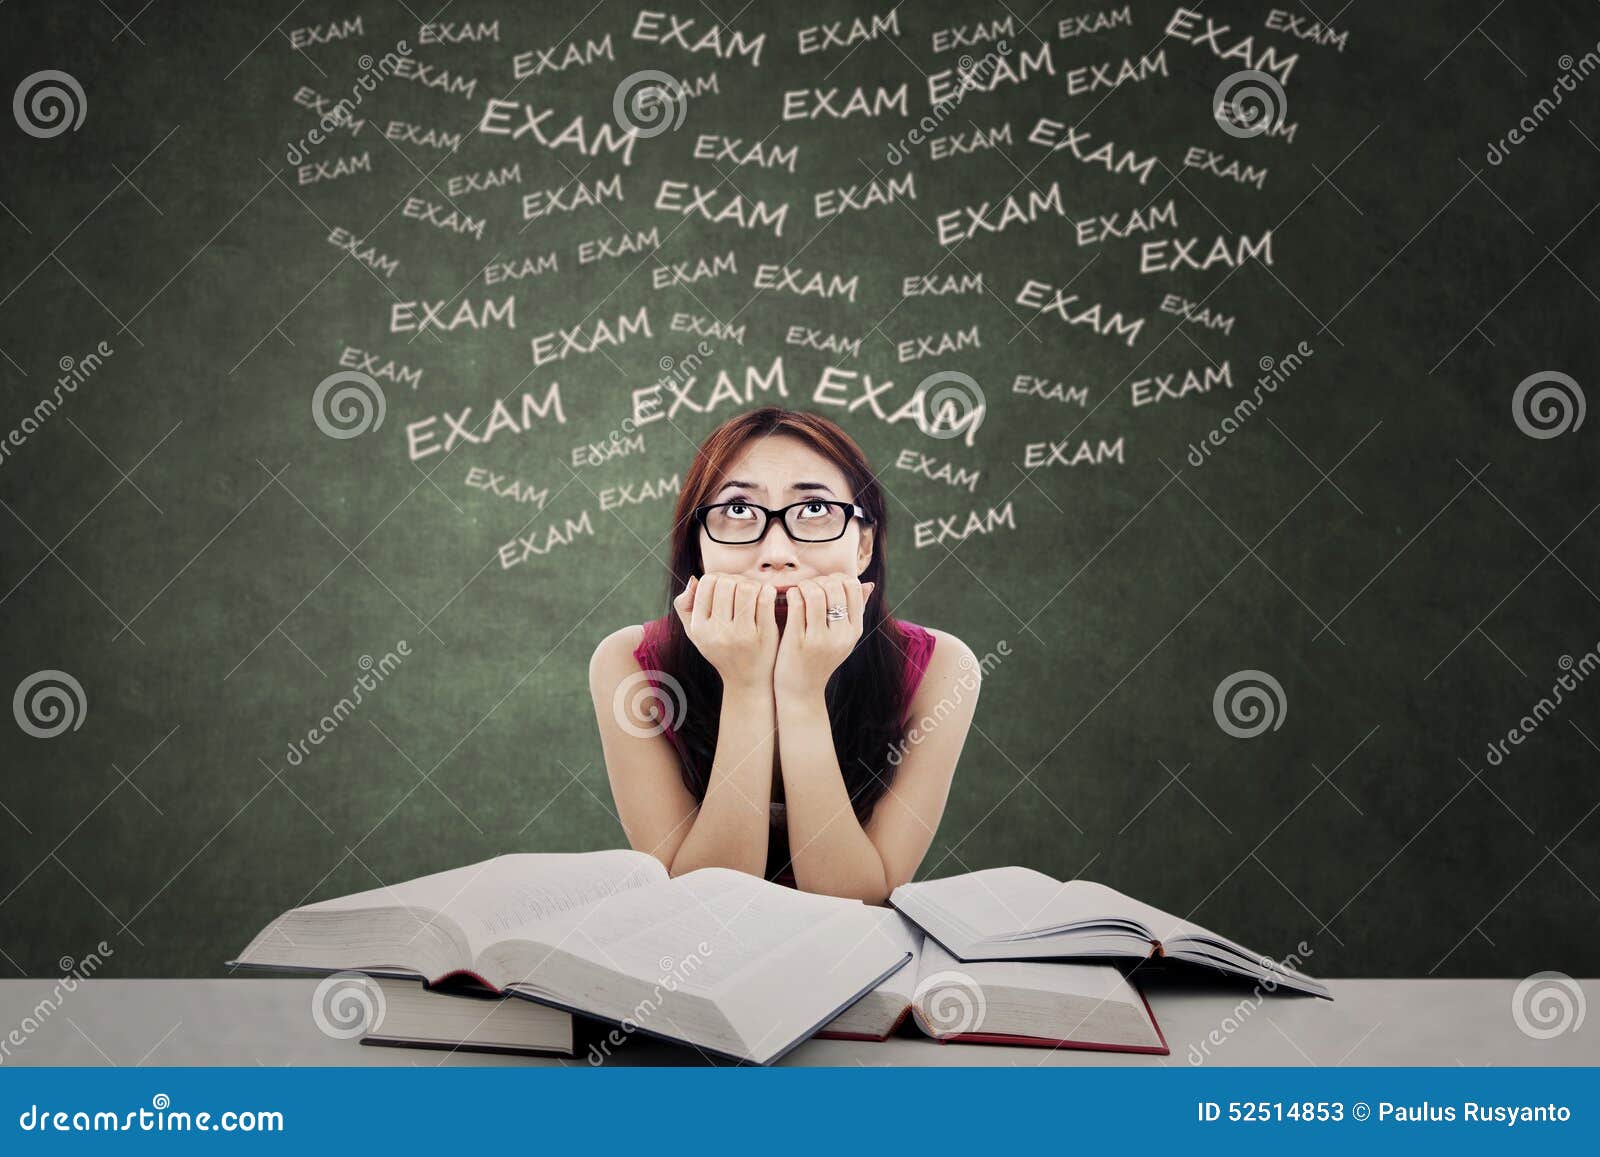 student feel scared of exam